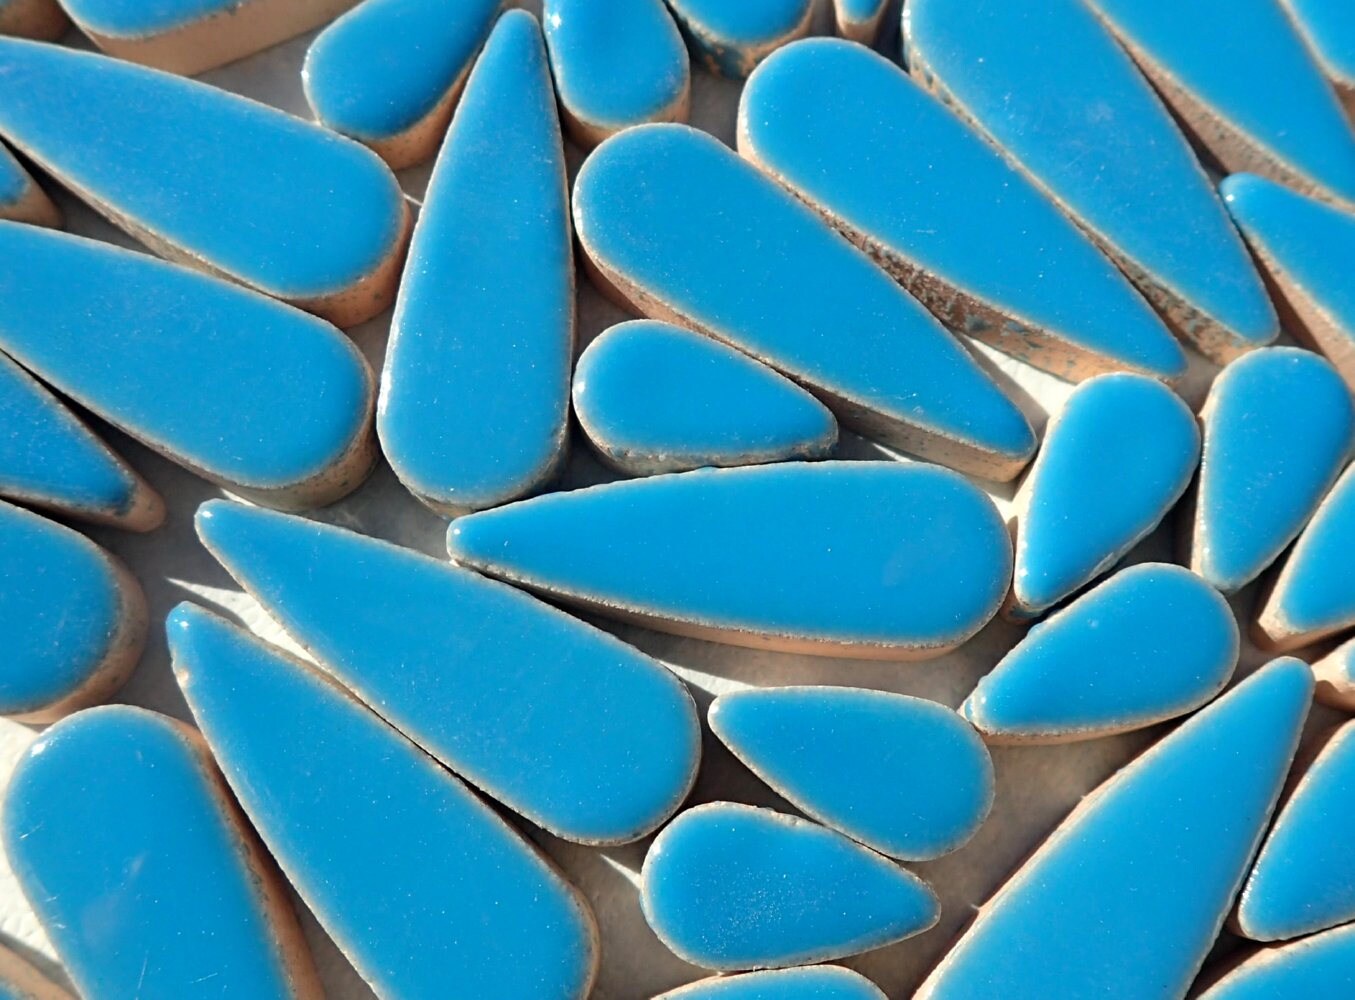 Mediterranean Blue Teardrop Mosaic Tiles - 50g Ceramic Petals in Mix of 2 Sizes 1/2" and 3/5" in Thalo Blue